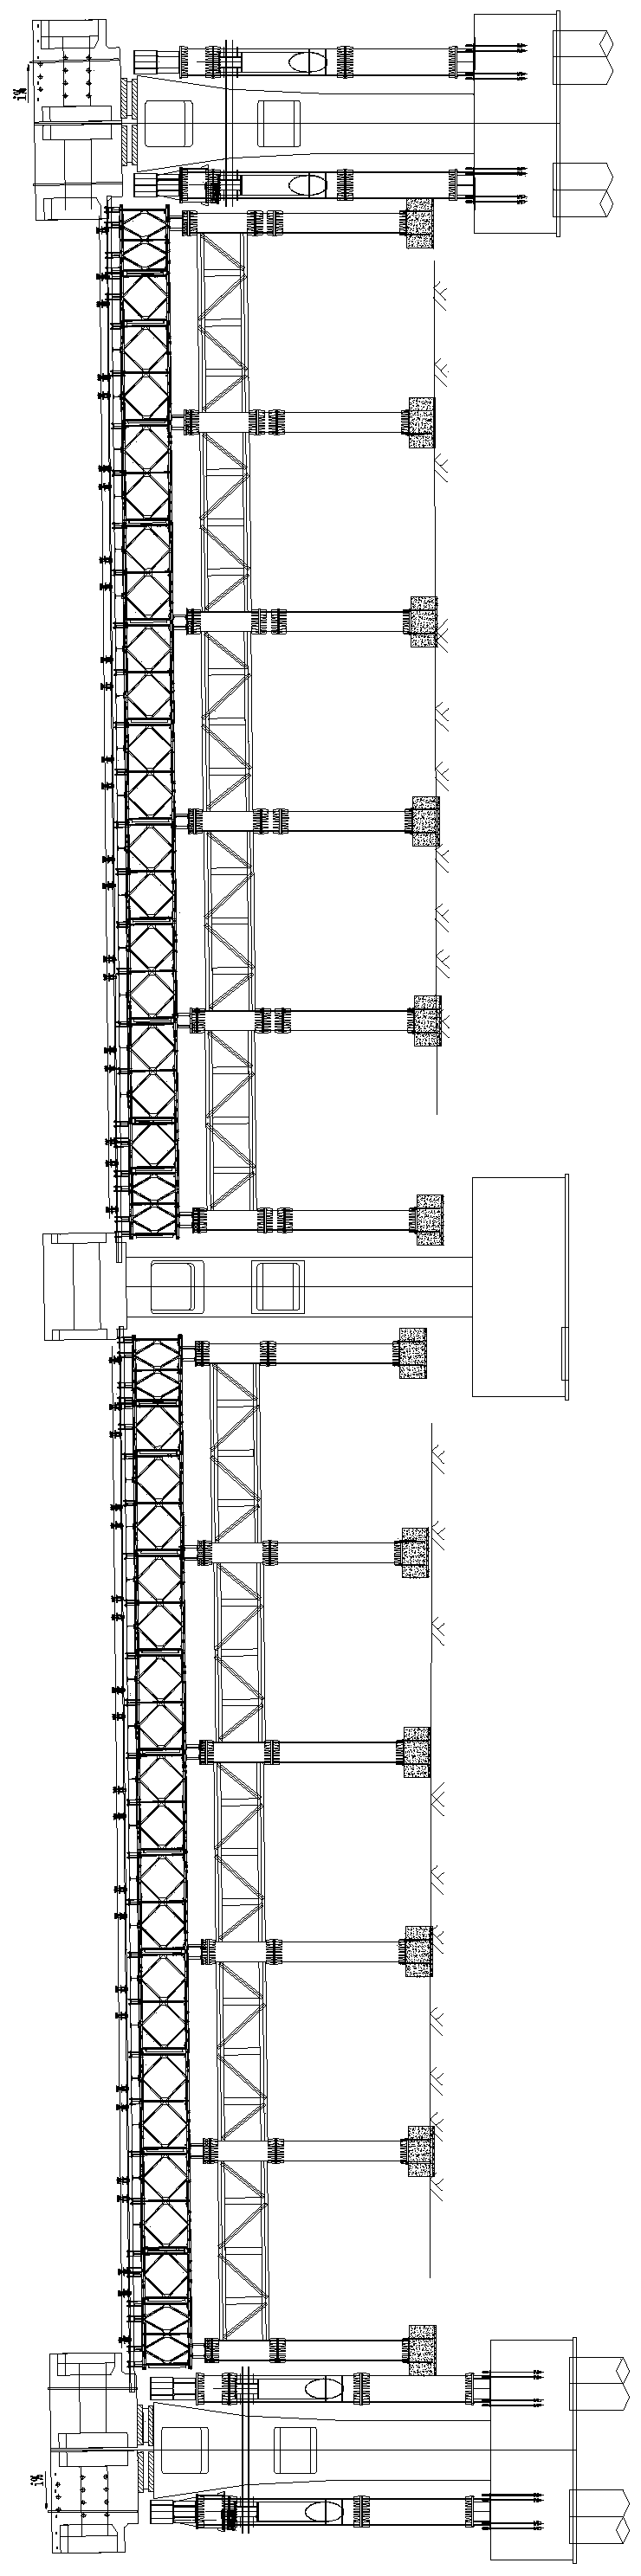 Mobile fabricated beam erection system for support method beam splicing of prefabricated segmental beams